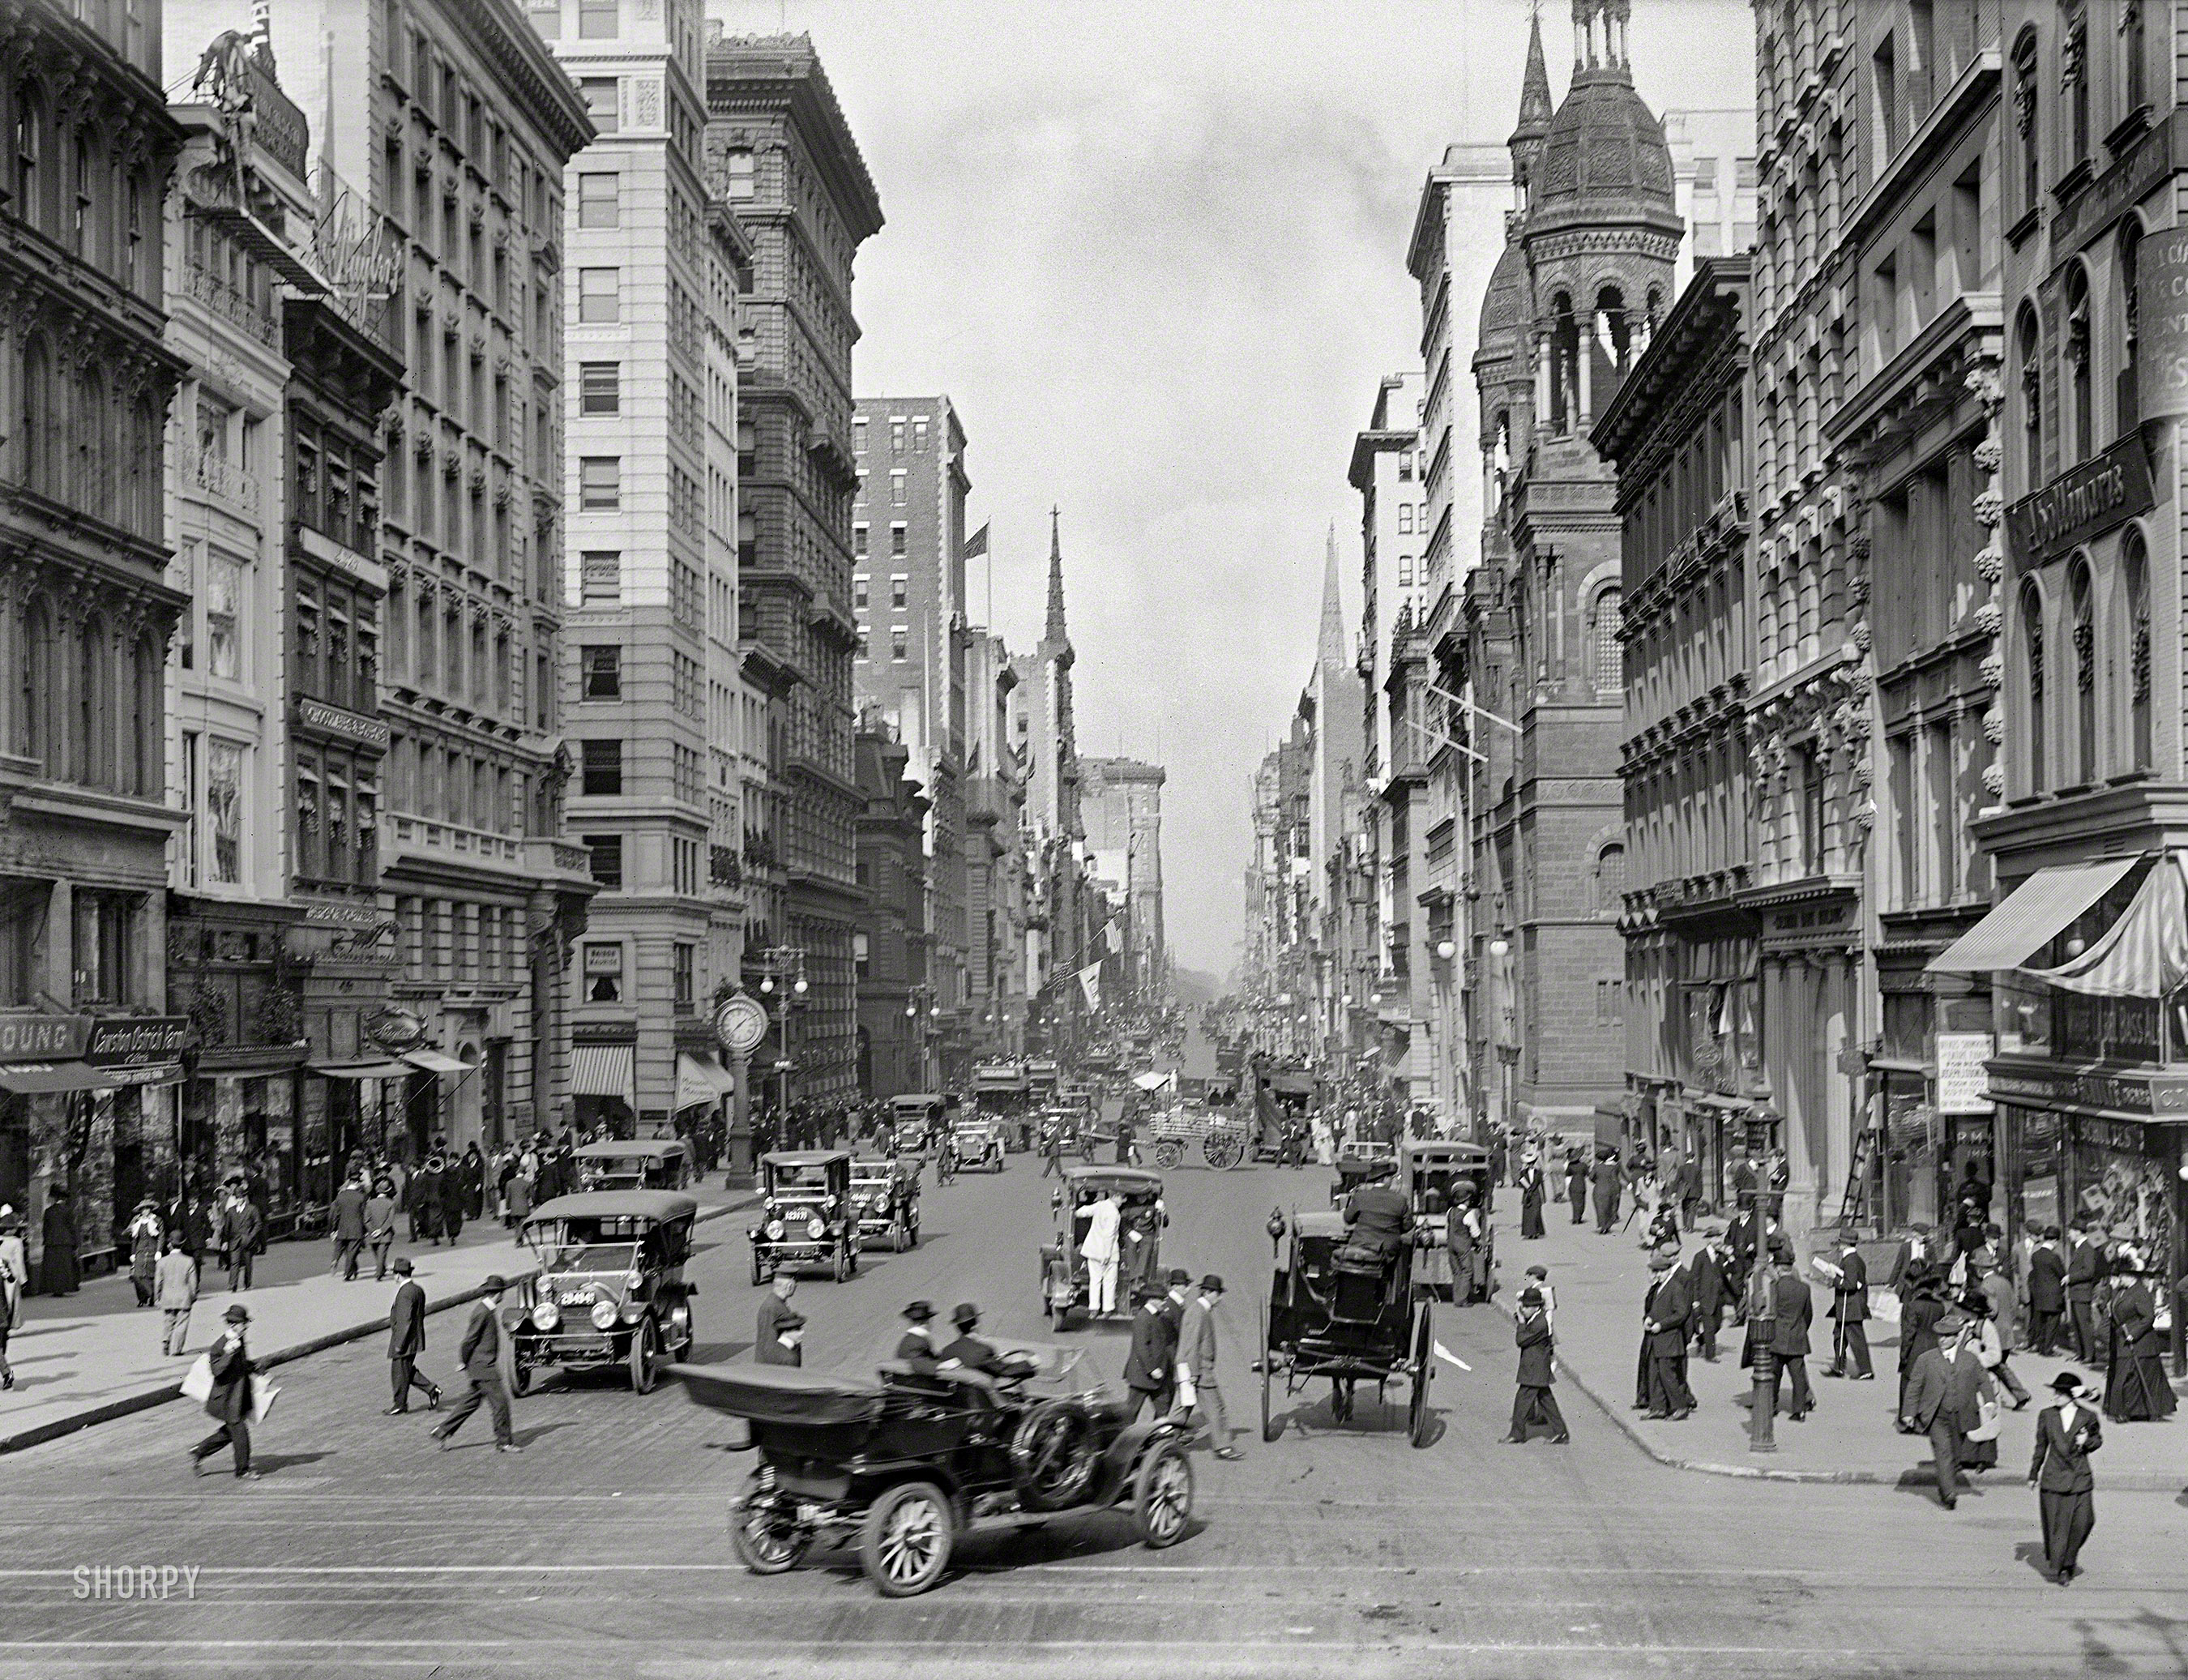 New York circa 1912. "Fifth Avenue at 42nd Street." At left, the East Coast outlet of California's Cawston Ostrich Farm. 5x7 inch glass negative. View full size.